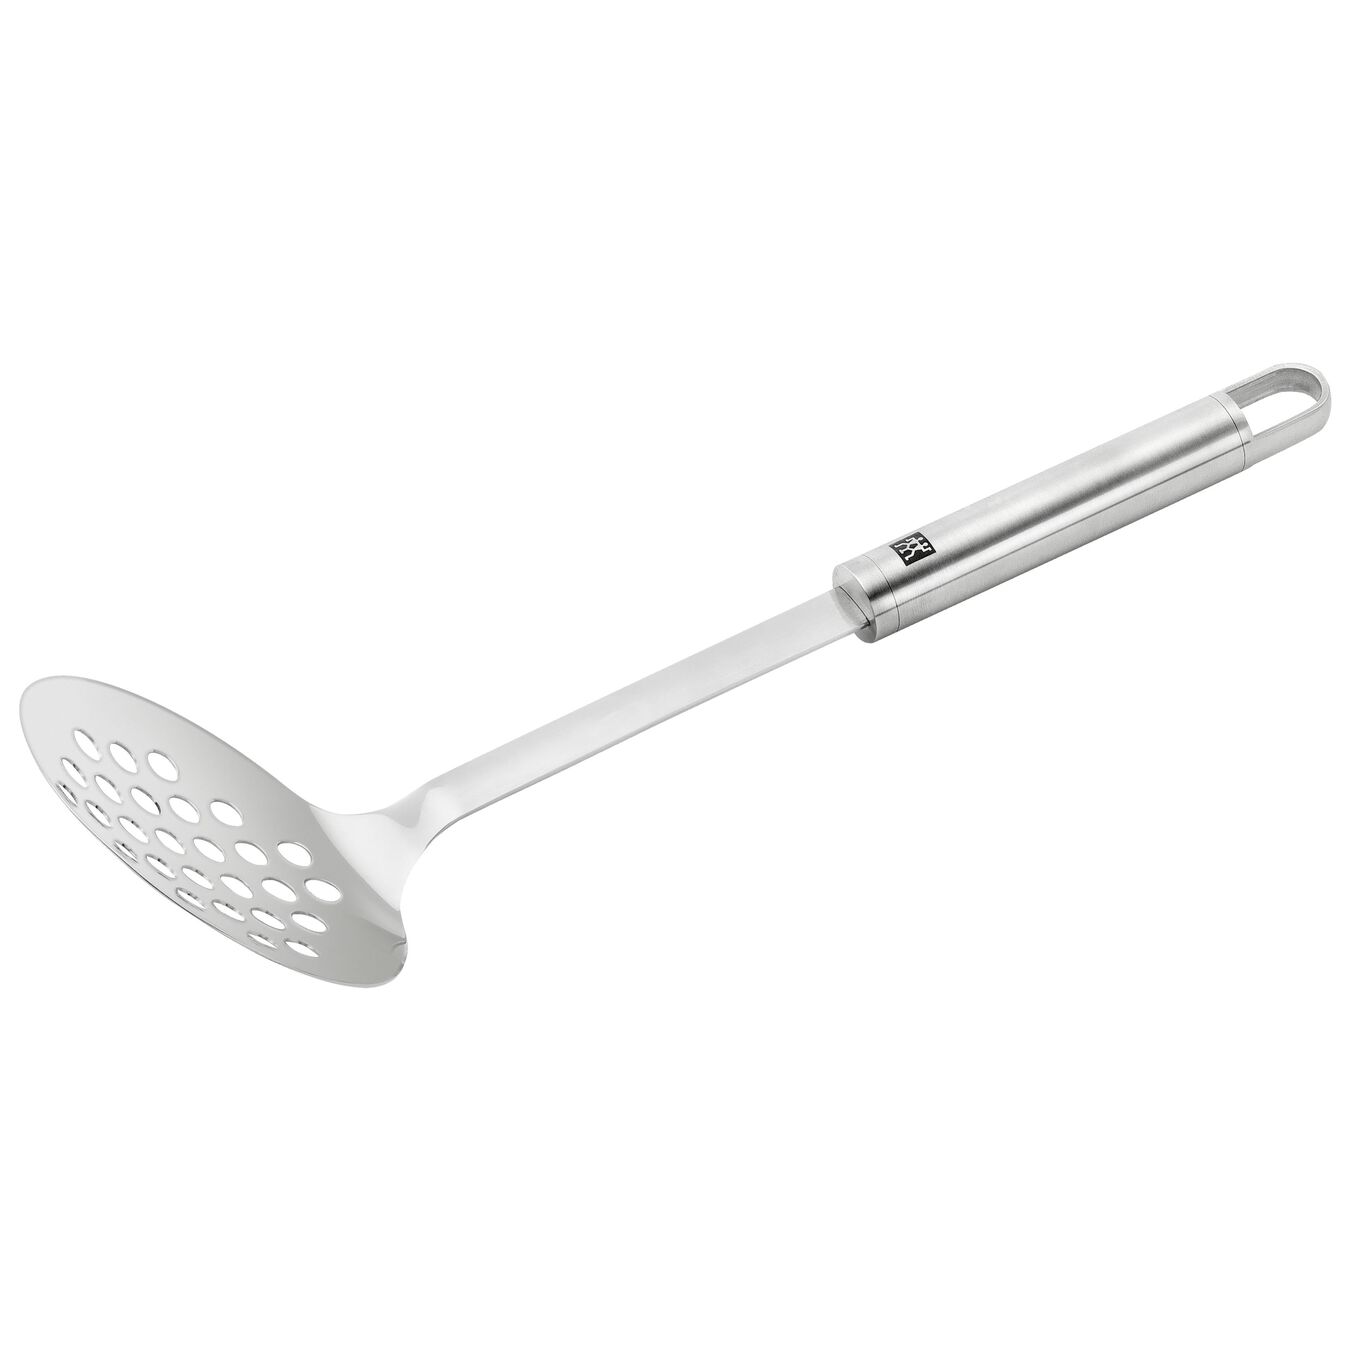 33 cm 18/10 Stainless Steel Skimming ladle, silver,,large 1